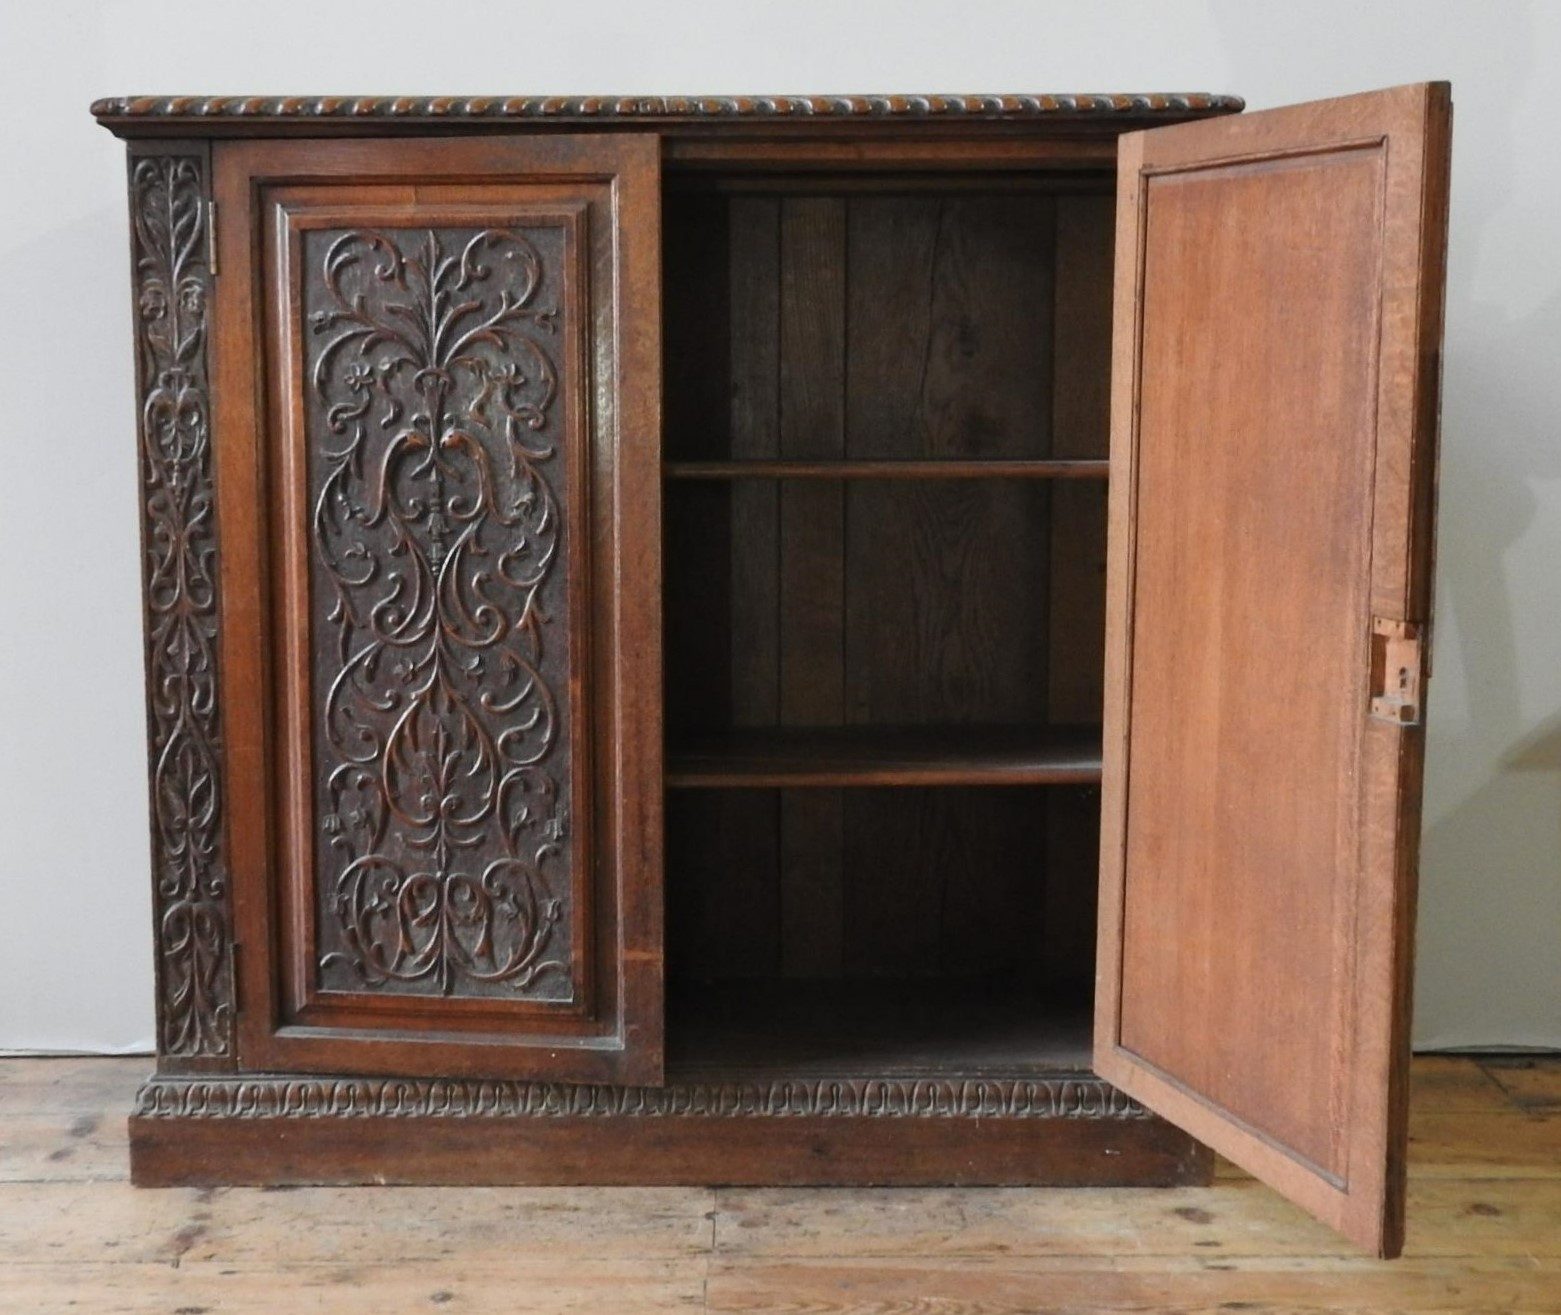 A 19TH CENTURY CARVED OAK TWO DOOR BOOKCASE, the two door panels decorated with foliate carving - Image 6 of 6